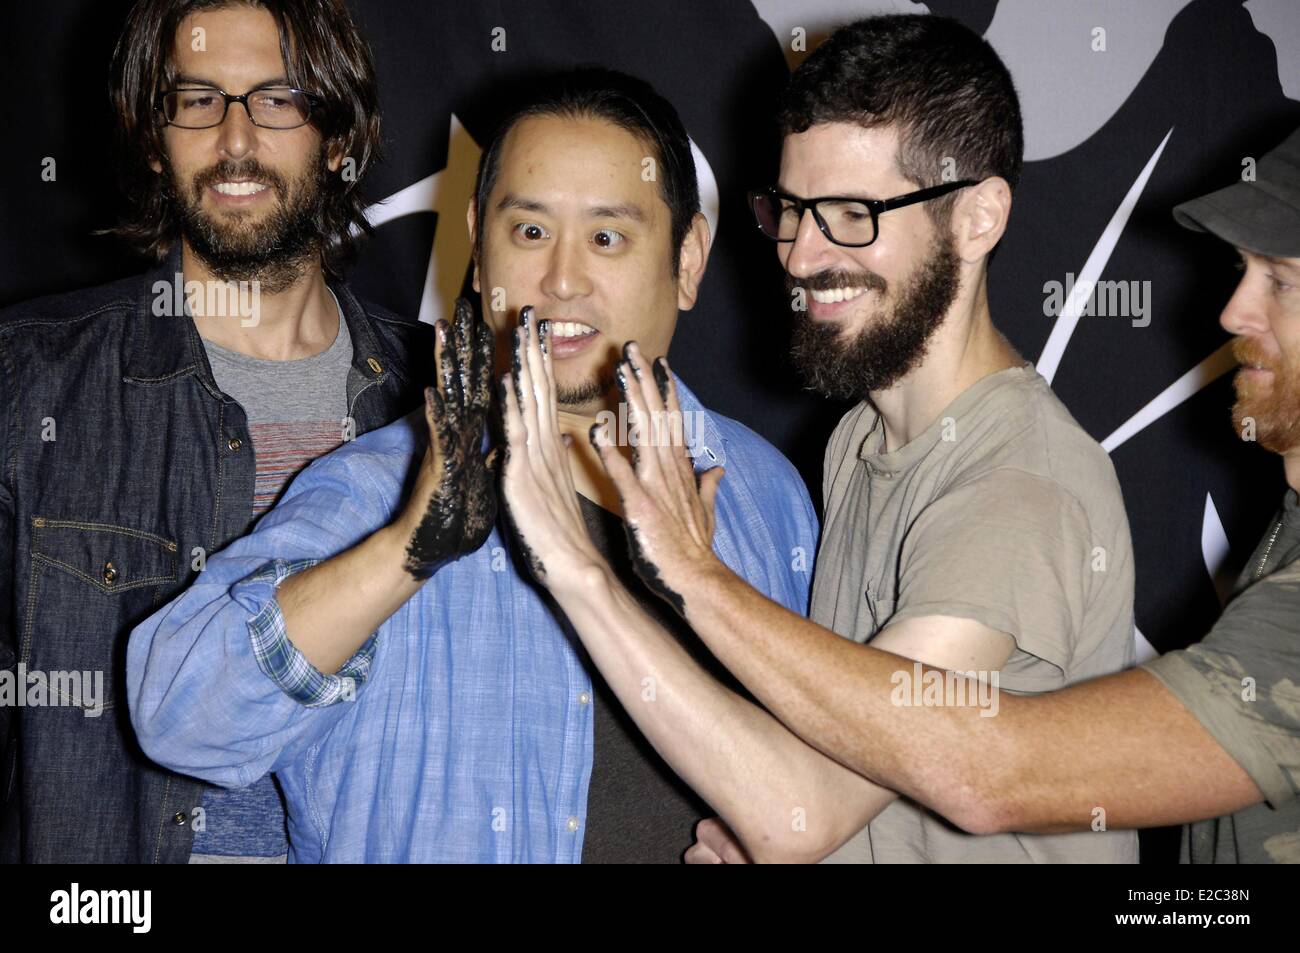 Los Angeles, CA, USA. 18th June, 2014. Rob Bourdon, Joe Hahn, Brad Delson, Dave Phoenix Farrell at the induction ceremony for Guitar Center RockWalk Inducts Linkin Park, Sunset Boulevard, Los Angeles, CA June 18, 2014. Credit:  Michael Germana/Everett Collection/Alamy Live News Stock Photo